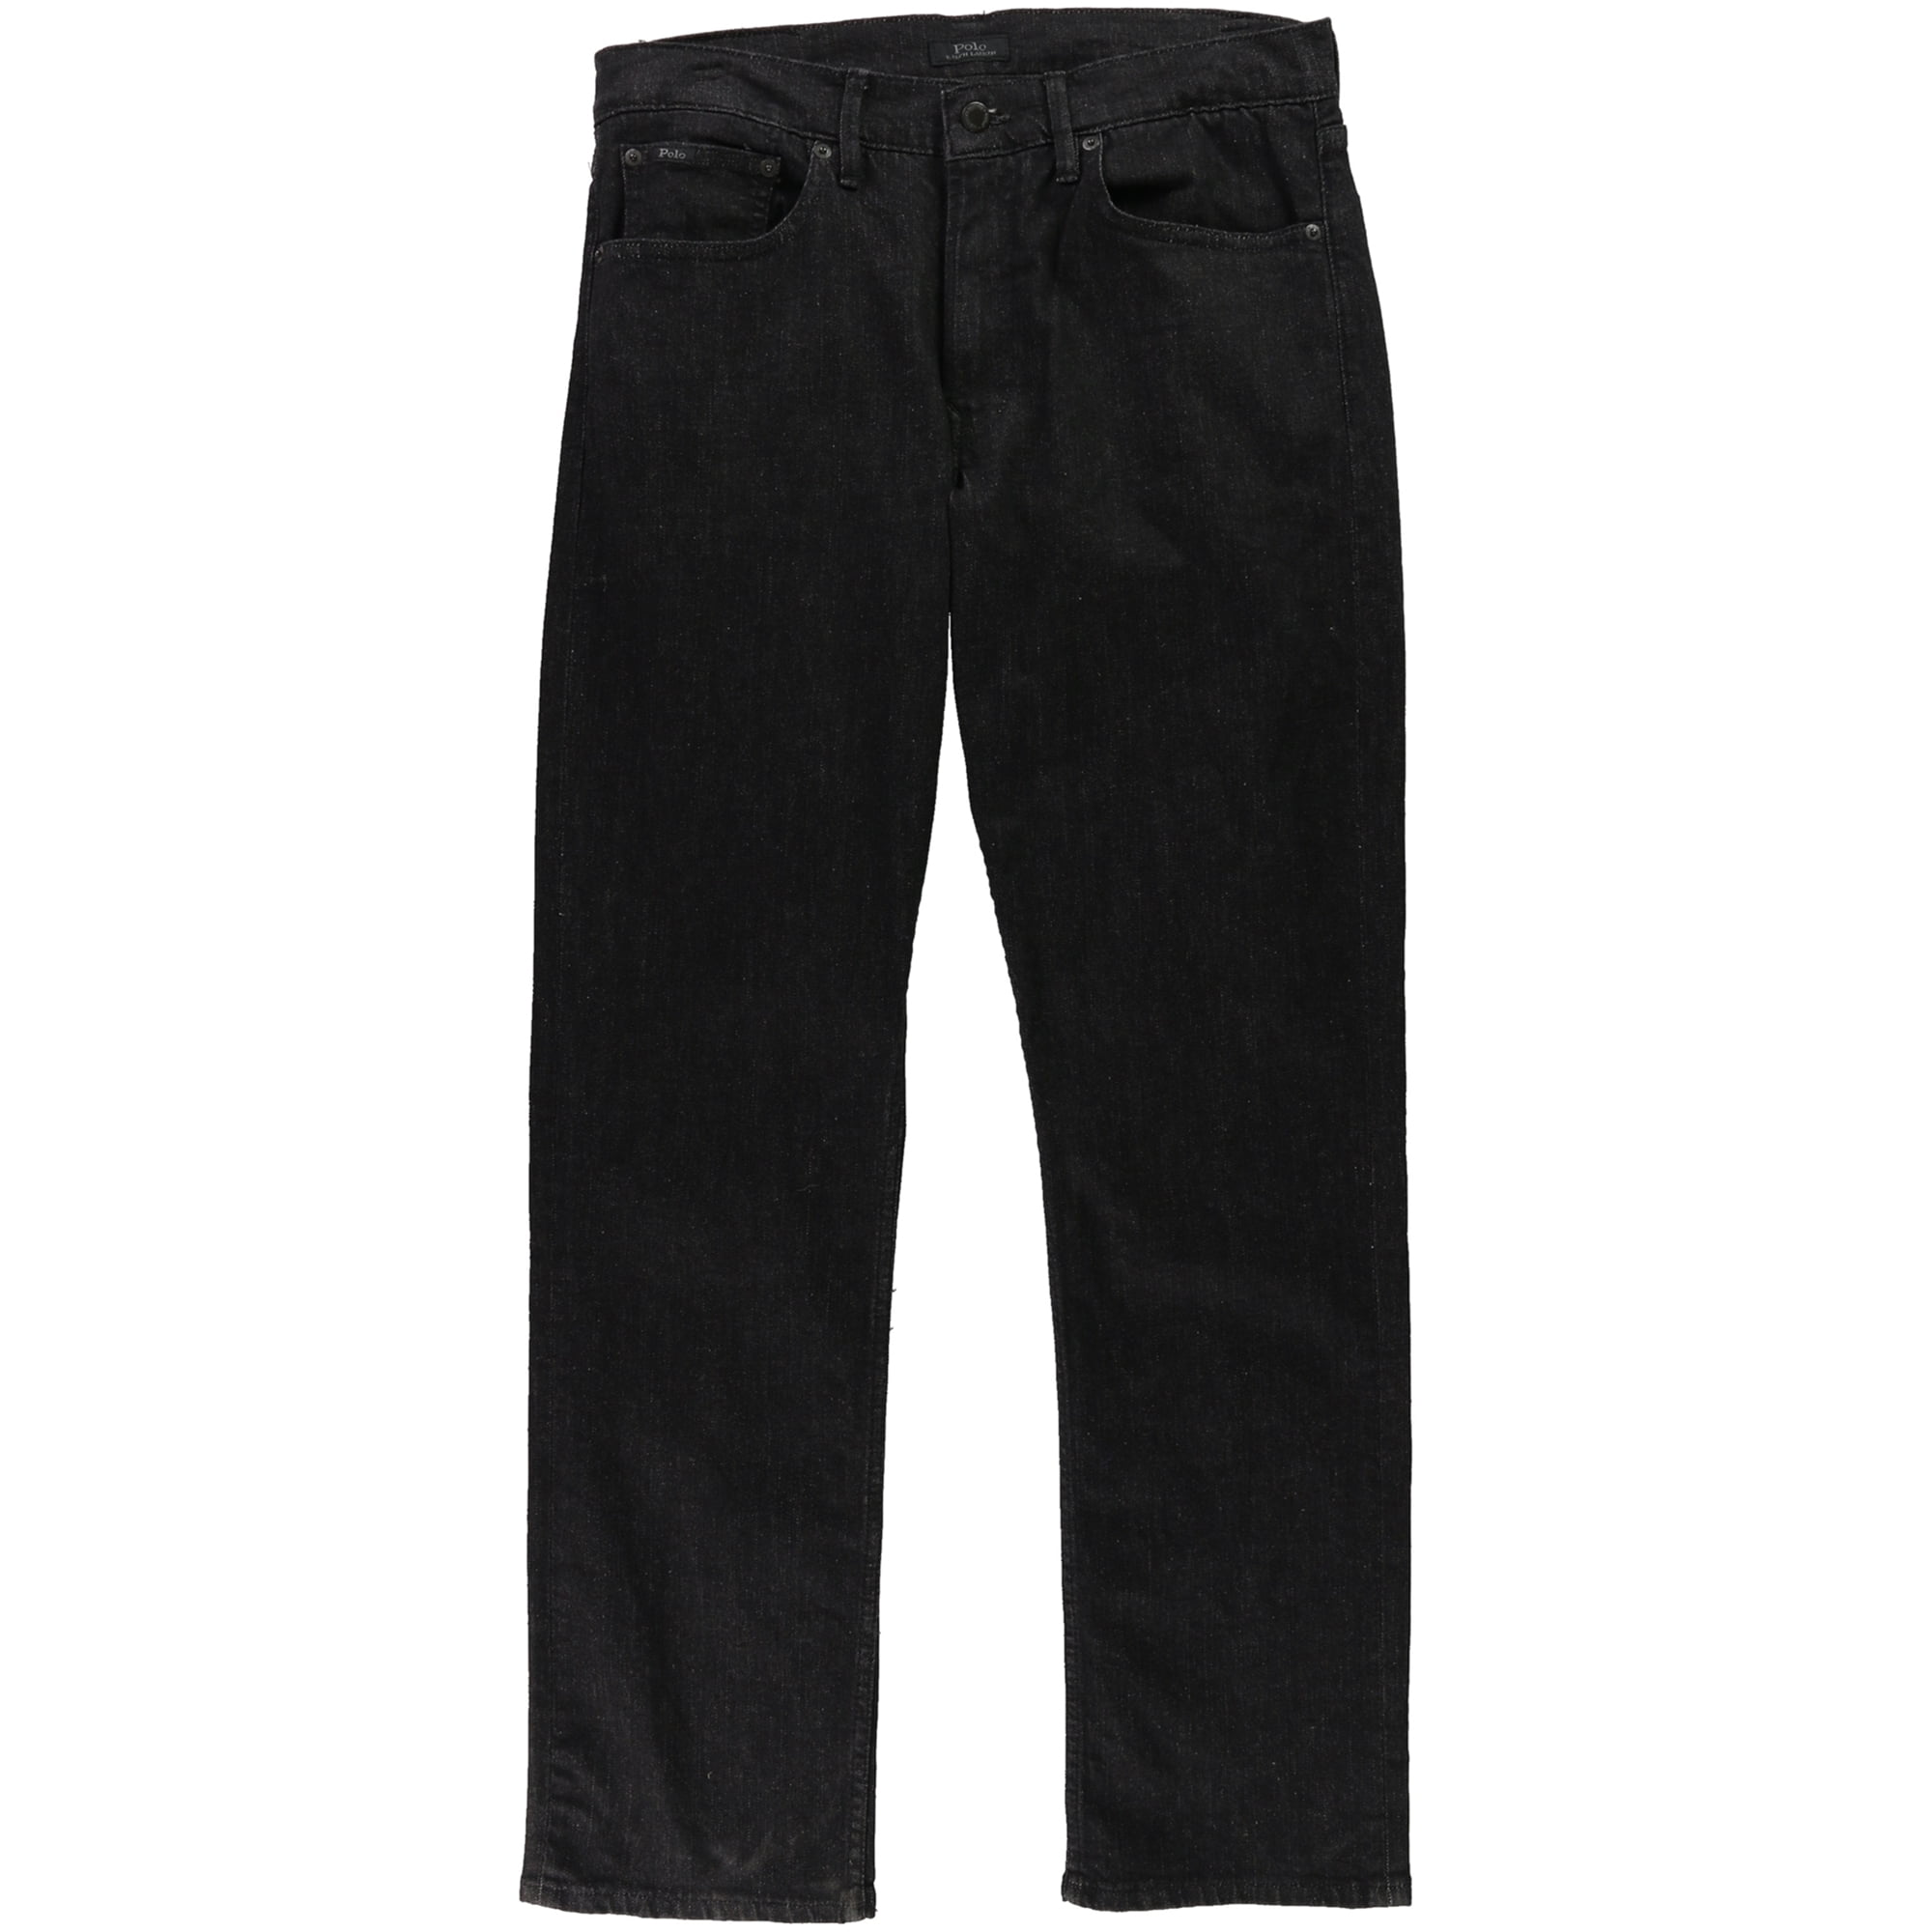 polo prospect straight jeans